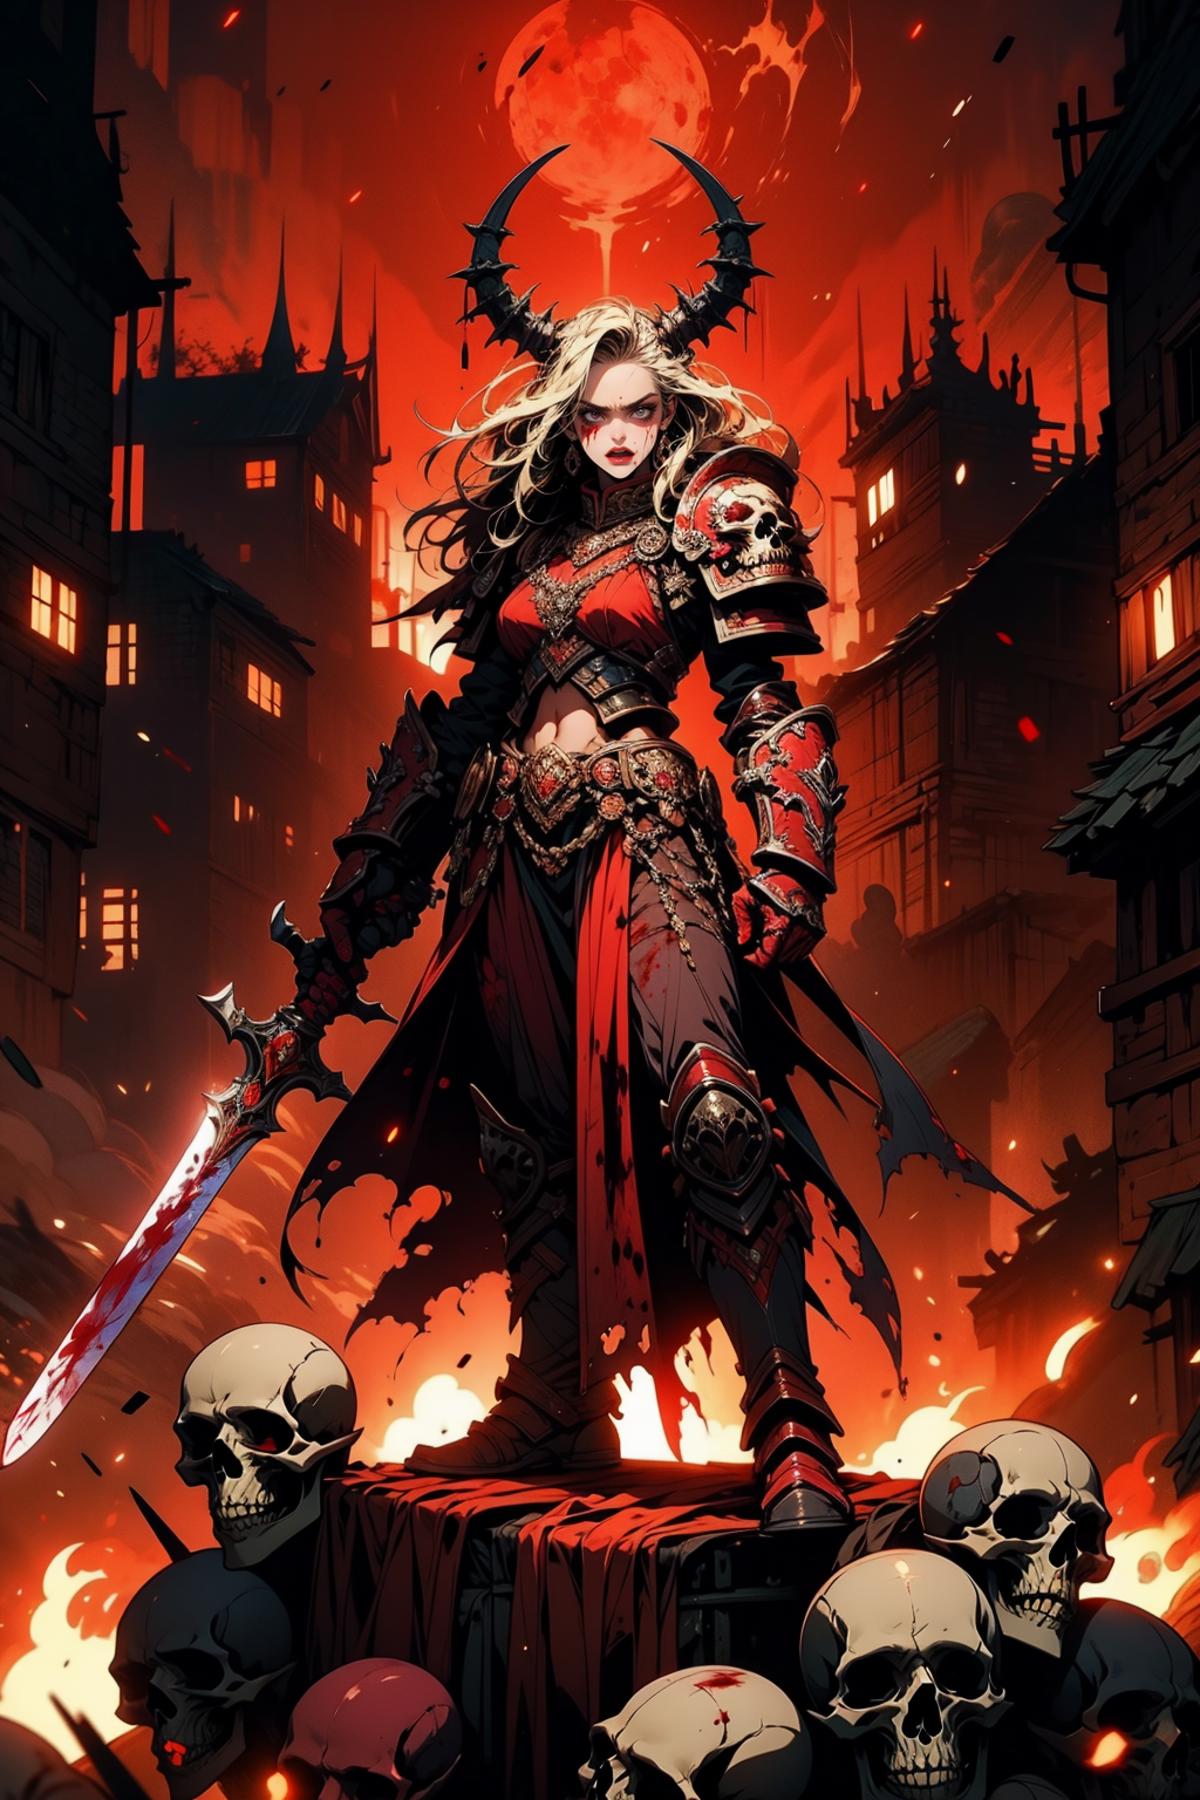 A warrior dressed in red armor stands on skulls as she wields a sword.